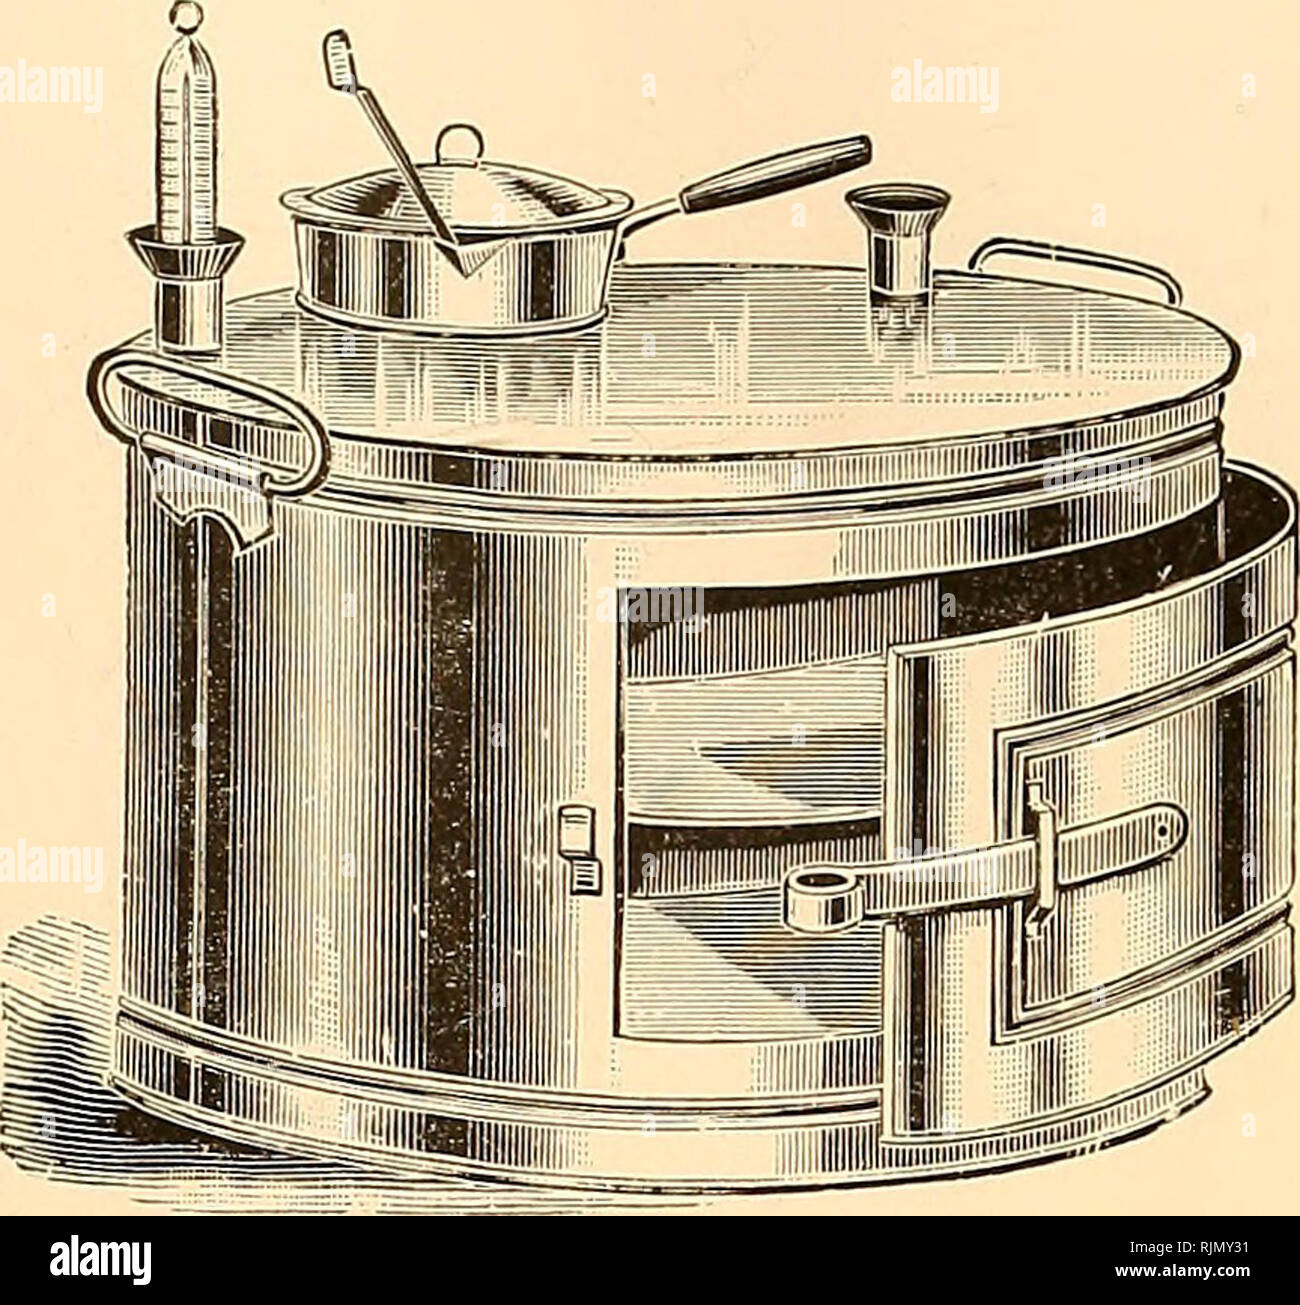 . Bacteriological apparatus : pathological, biochemical. Scientific apparatus and instruments; Bacteriology; Chemical industry. ©J)? Will (Eatpatatian, ftattytsUv, N.. 16250 16250 Paraffin Bath and Drying Oven—Reeve's. Made of very heavy copper and mounted on sheet-iron base, not illustrated; has a removable shelf; contains stock paraffin cup of 500 cc capacity with object lifter, cover and handle; outside dimensions: height, 22 cm; diameter, 26 cm; drying oven: height, 13 cm; width, 17 cm; depth, 15 cm  Each 32.00. Please note that these images are extracted from scanned page images that may  Stock Photo